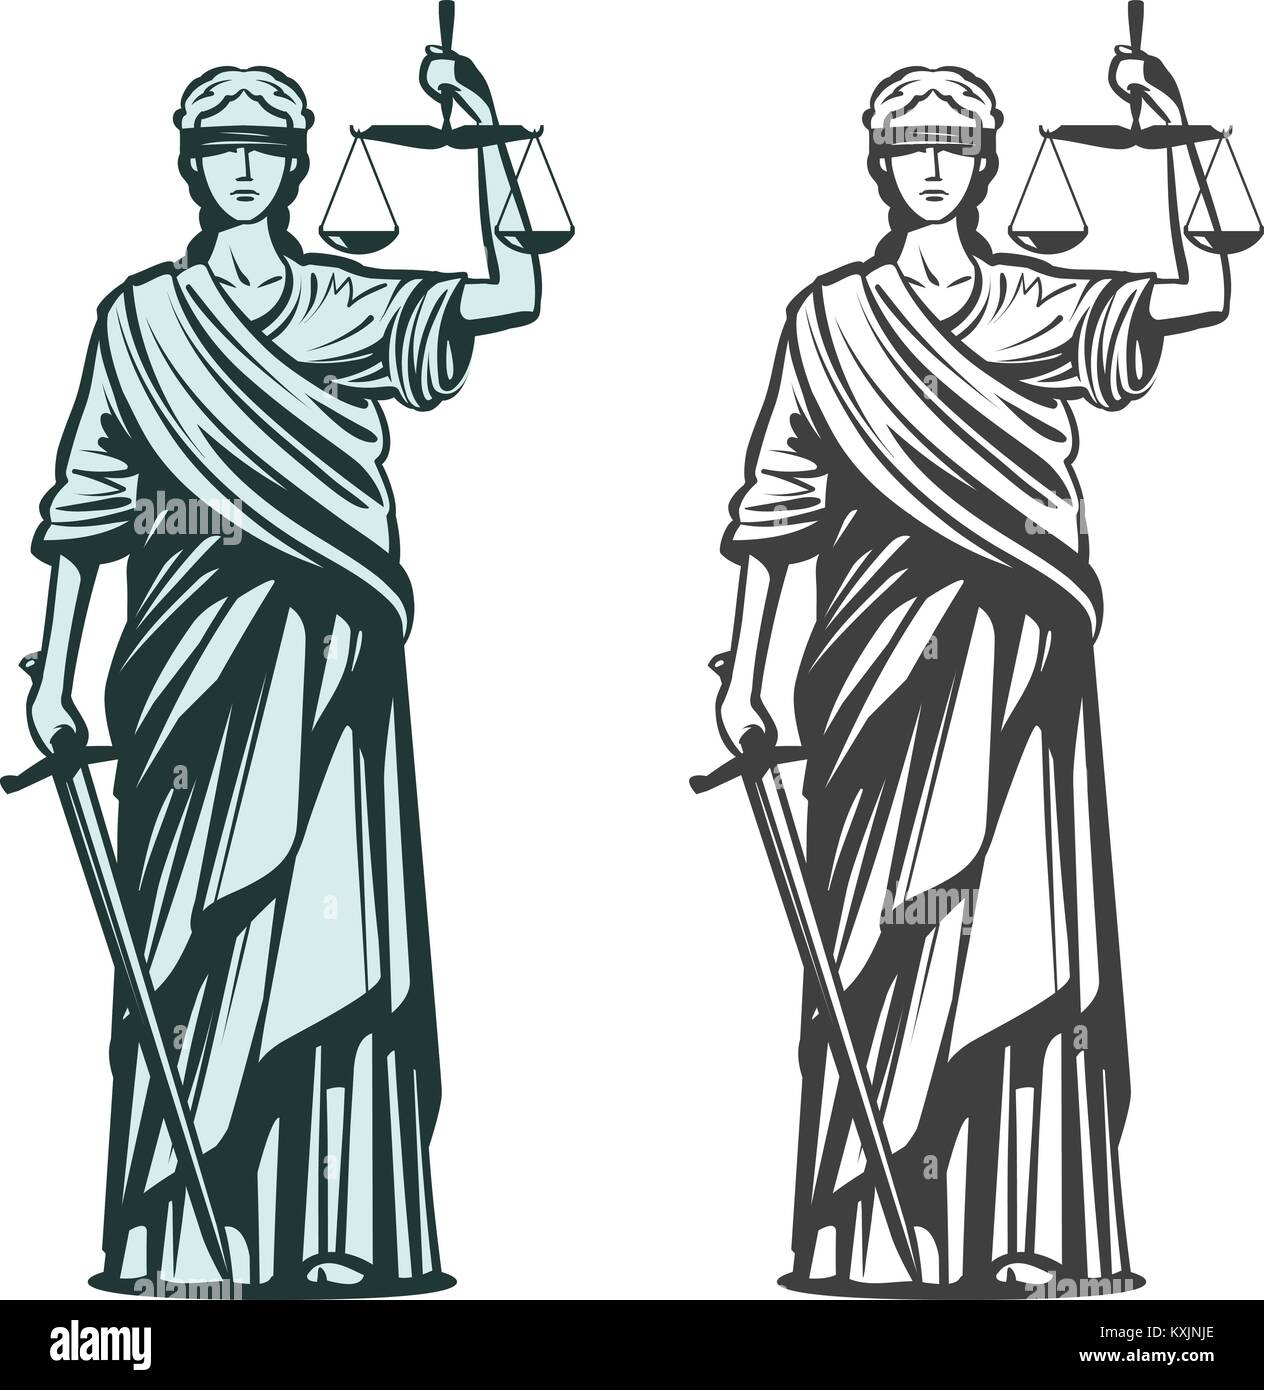 Illustration Of Lady Justice Stock Illustration  Download Image Now  Lady  Justice Justice  Concept Illustration  iStock